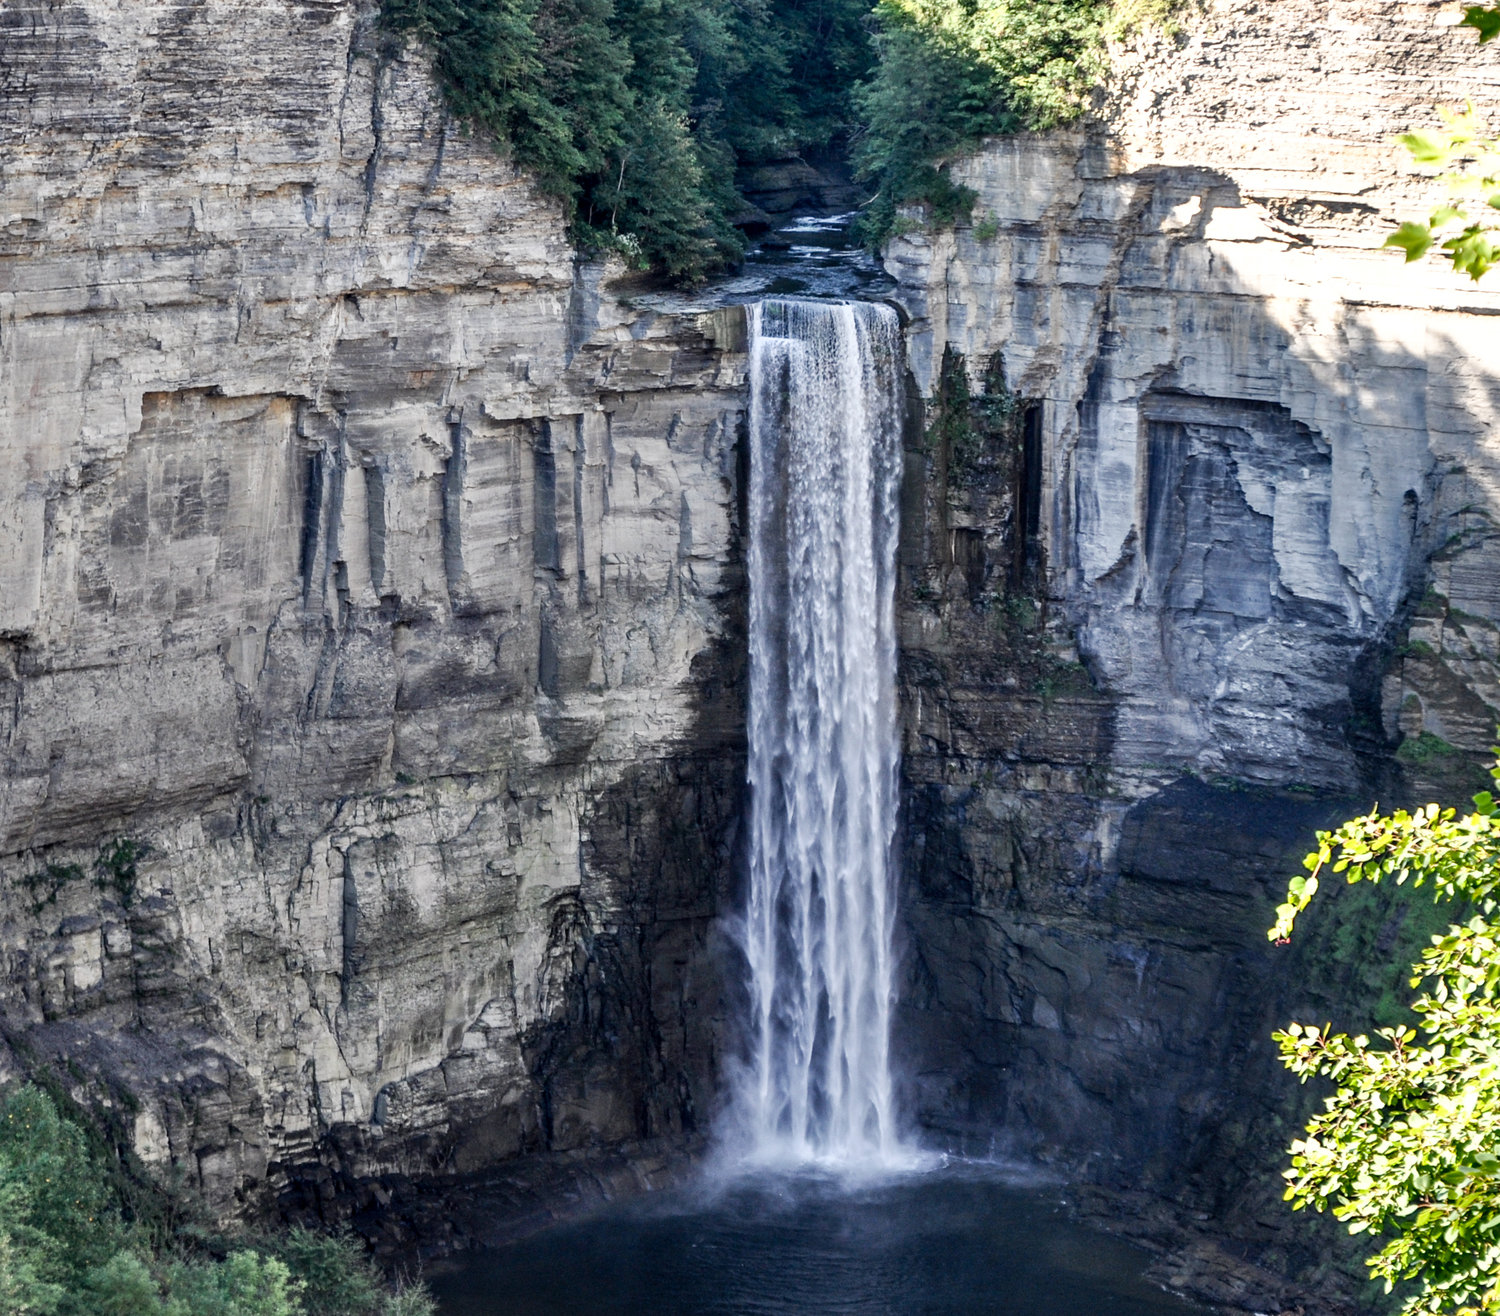 Gal-pal Lynne and I stopped outside of Ithaca, NY, to drink in the awesome magnificence of Taughannock Falls, one of many in the Finger Lakes region. As the bumper stickers and t-shirts declare: "Ithaca is Gorges."